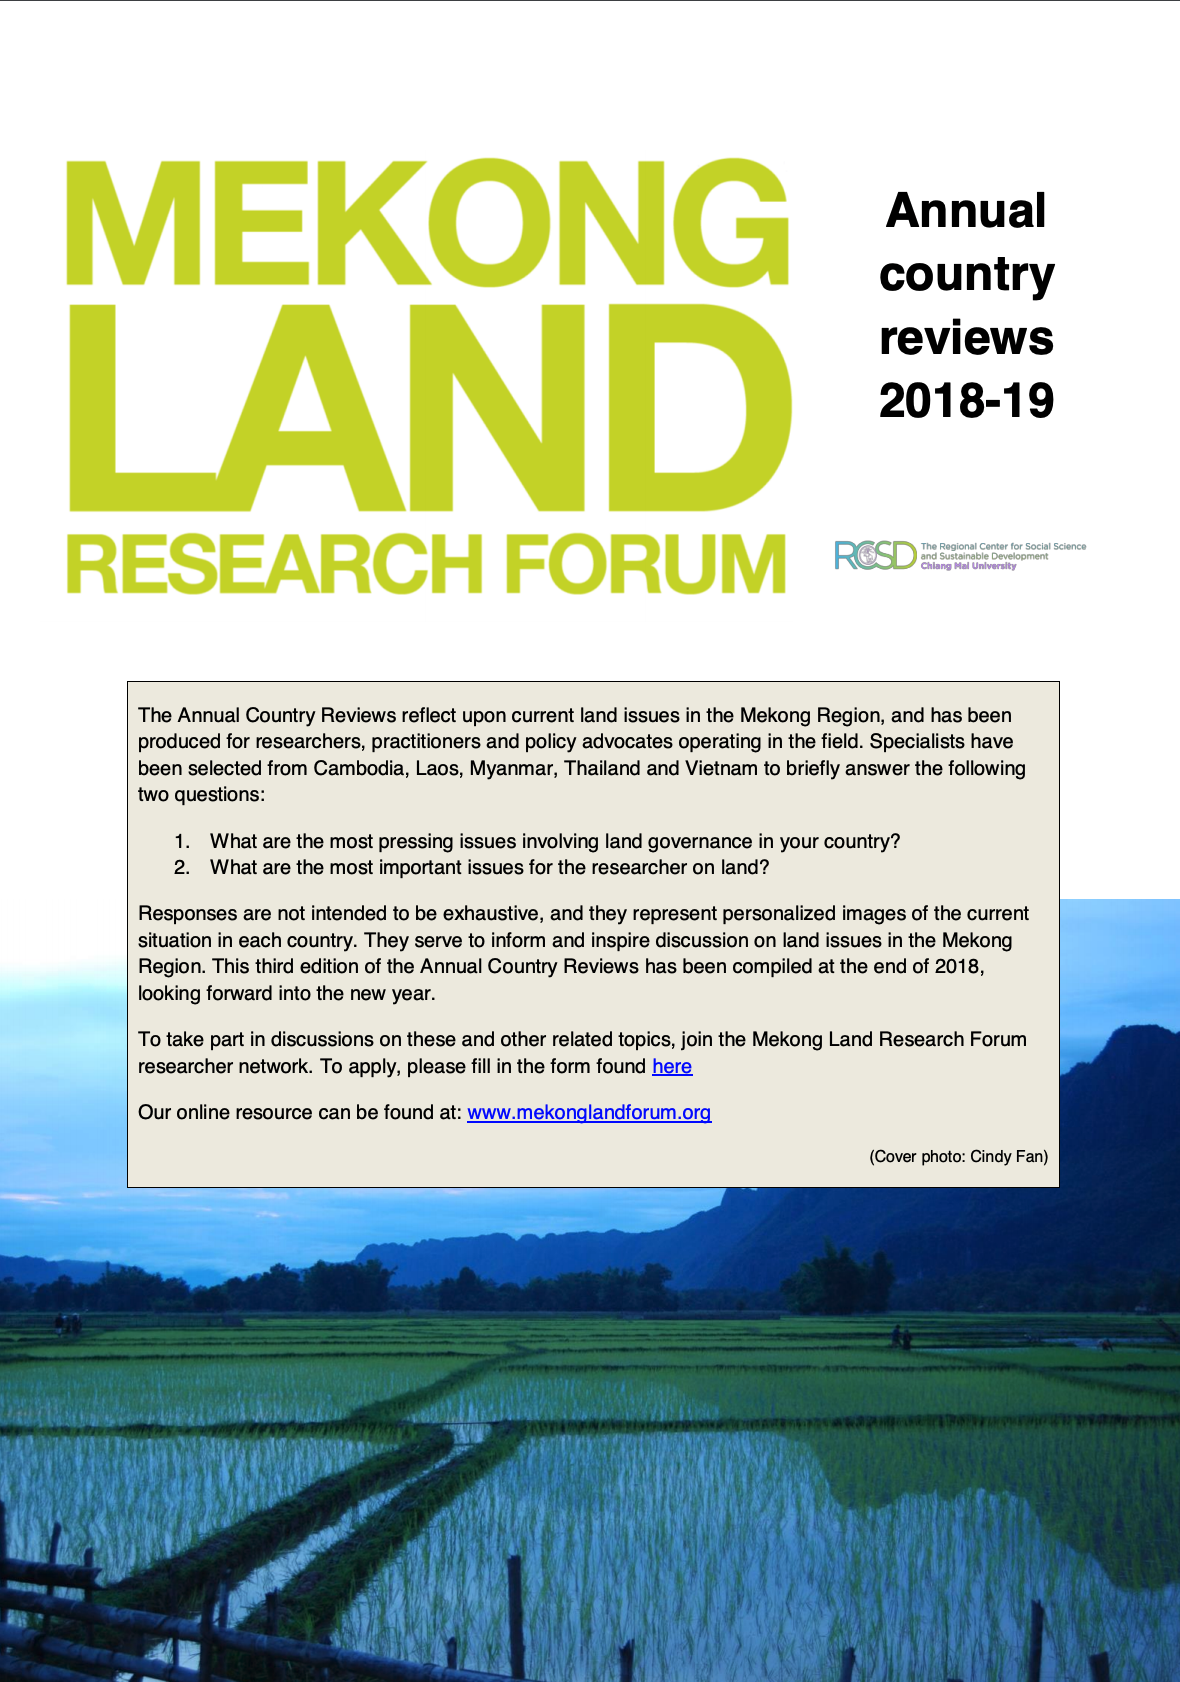 Mekong Land Research Forum: Annual country reviews 2018-19 cover image